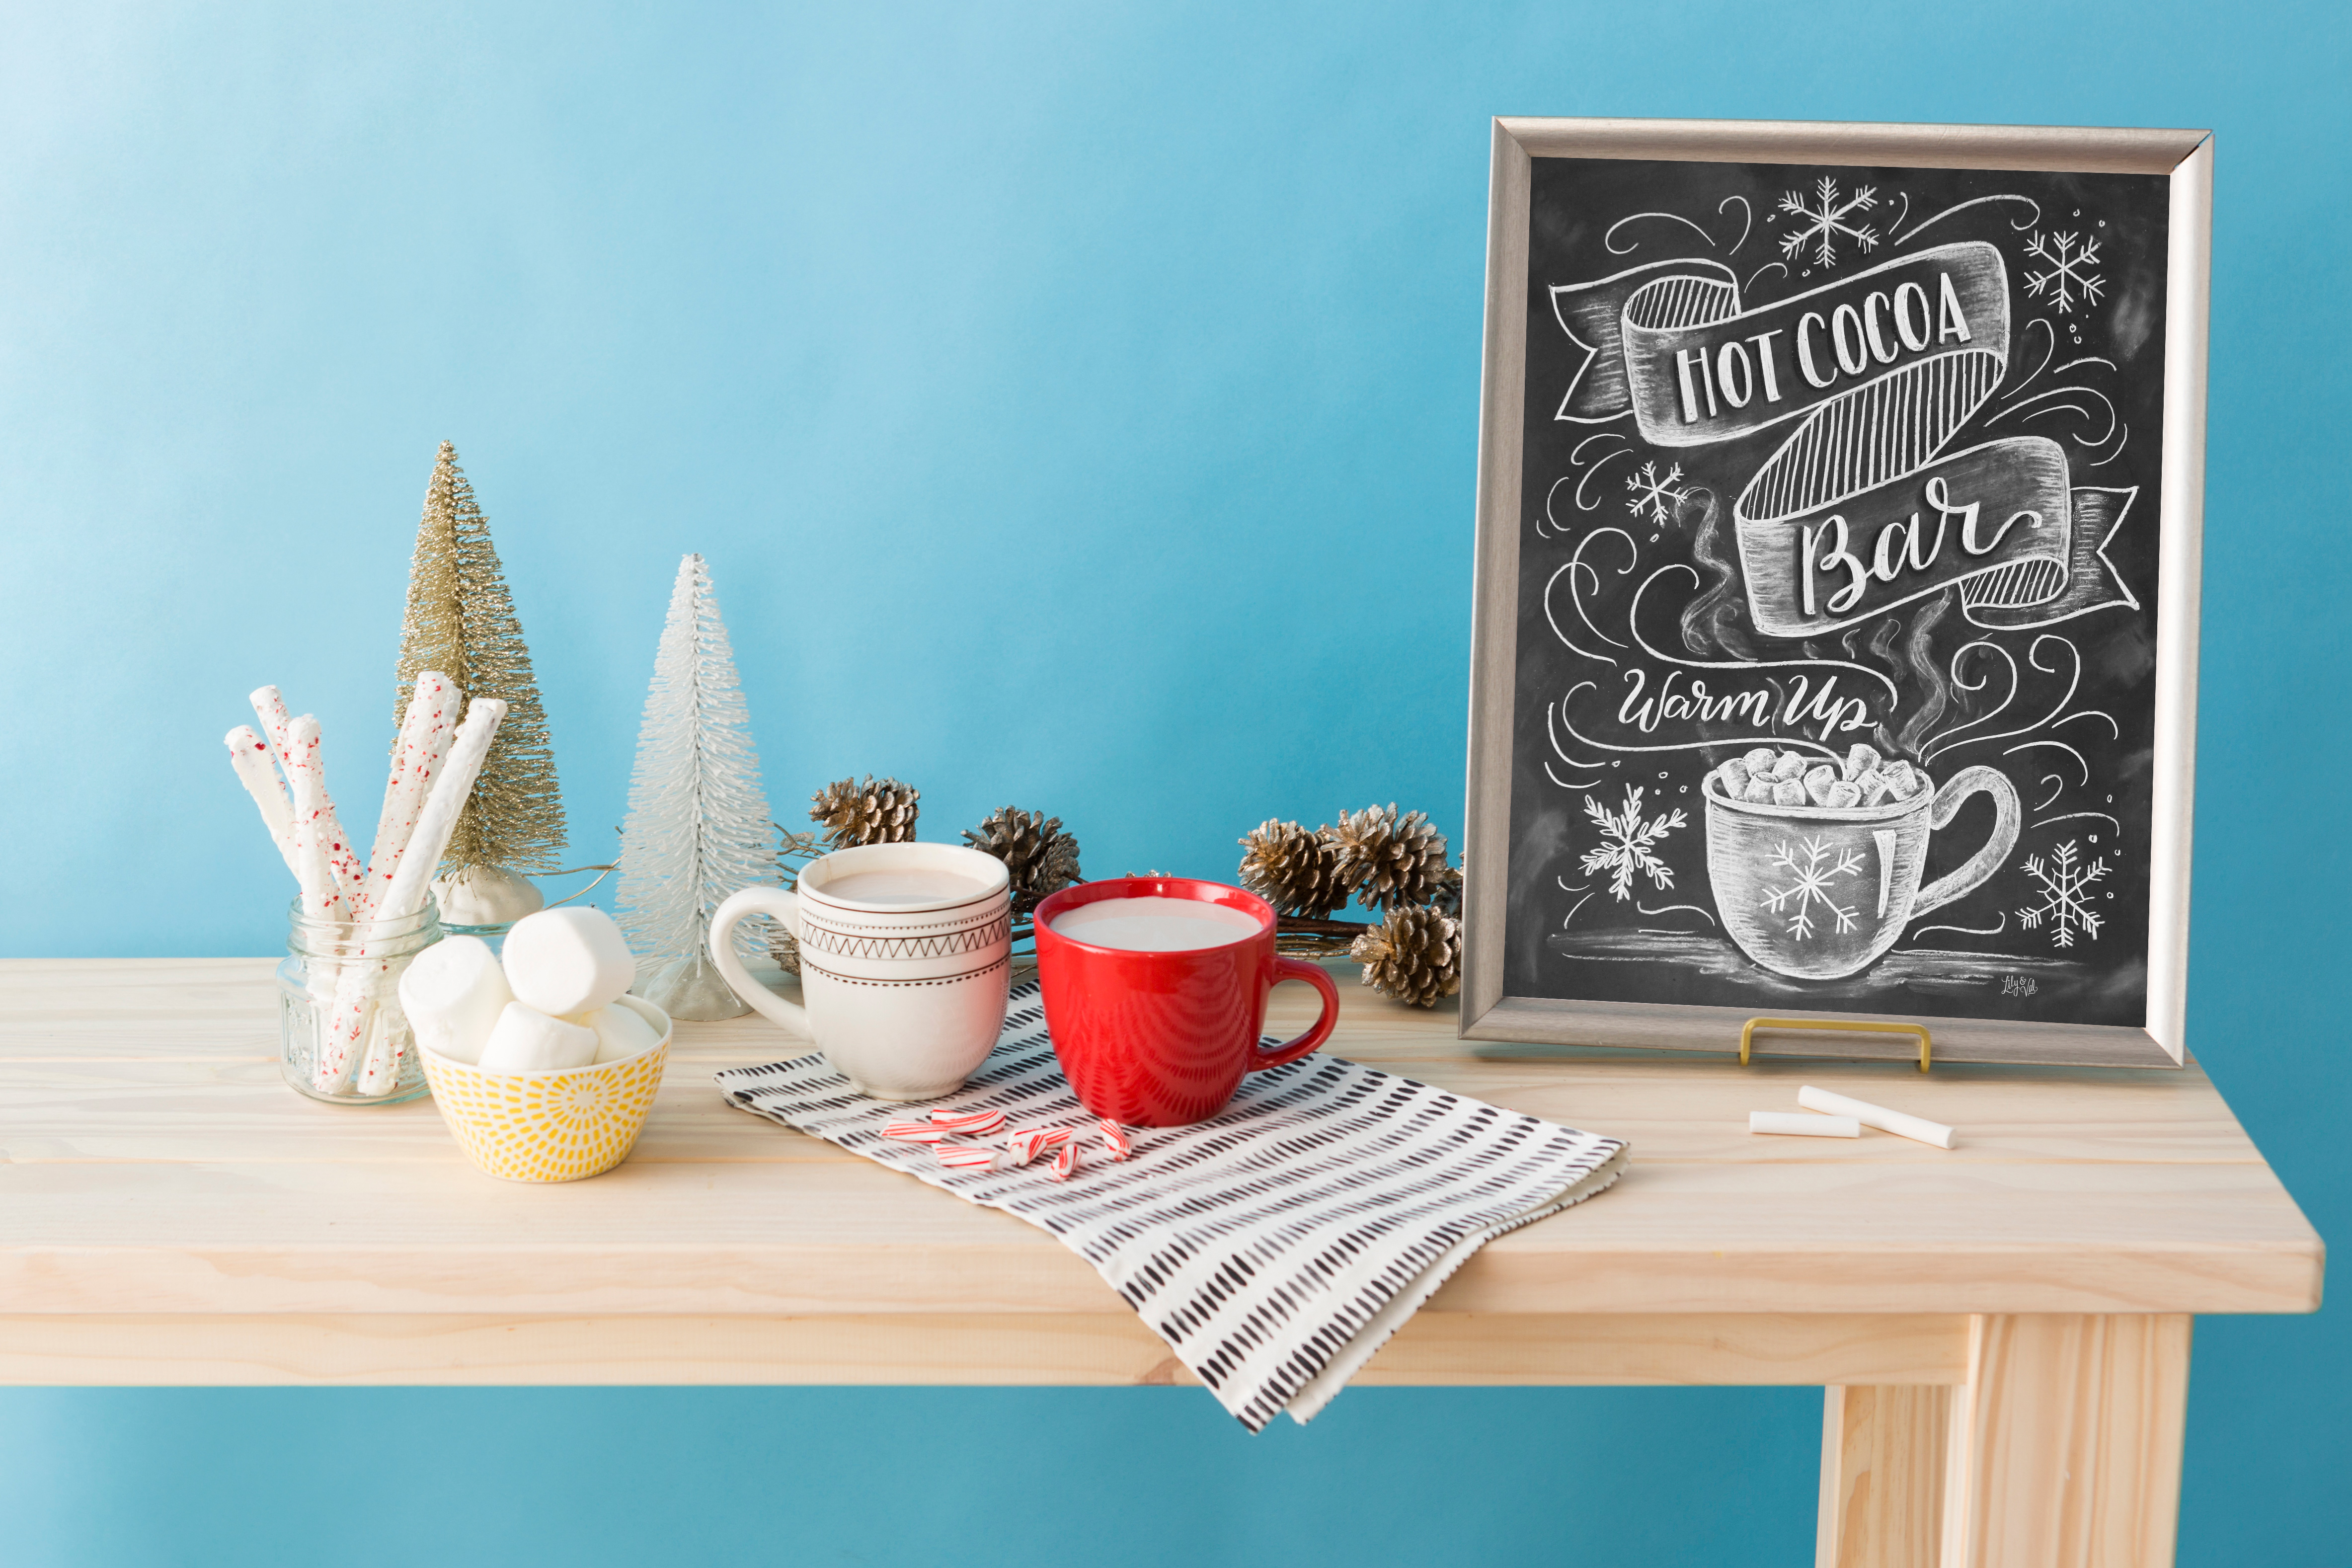 DIY Hot cocoa bar chalkboard sign by Valerie McKeehan offered as a free 17 page design guide through Brit + Co